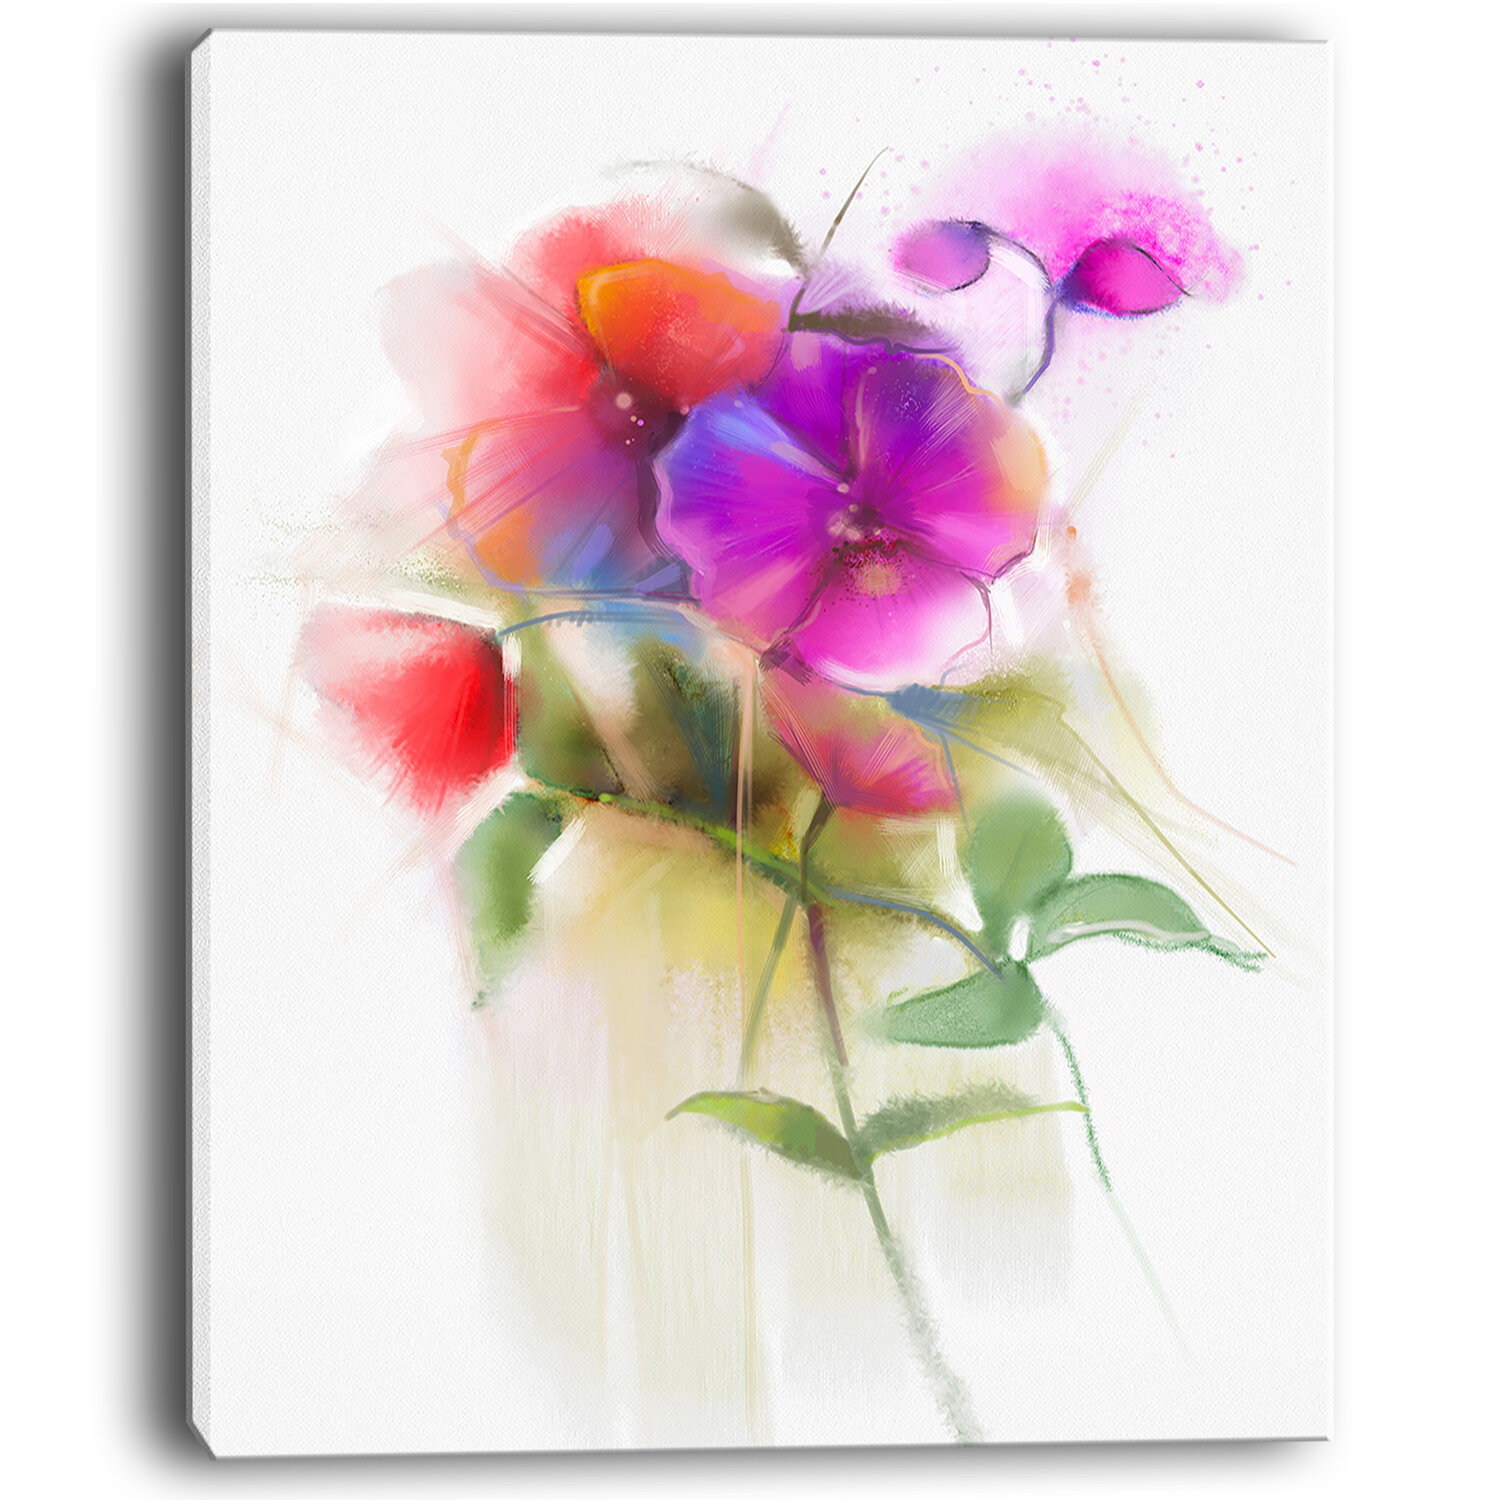 Ebern Designs Bunch Of Colorful Orchid Flowers Large Flower Wall Art On Wrapped Canvas Reviews Wayfair